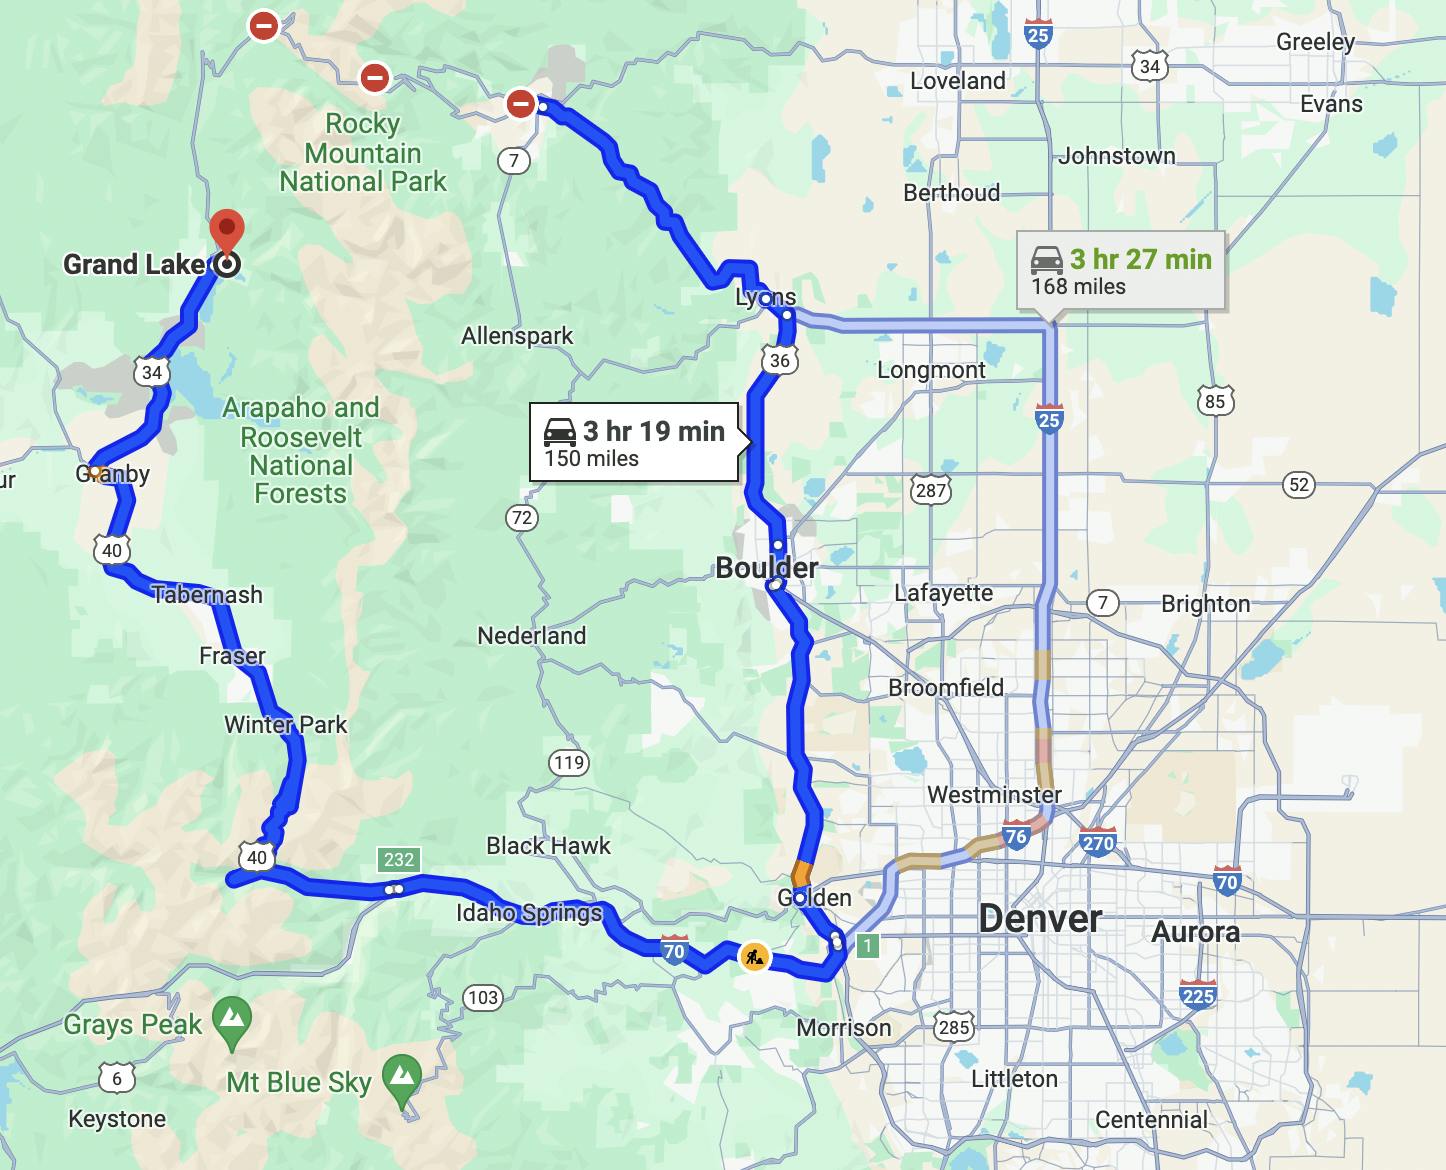 map of denver, colorado motorcycle route - trail ridge road